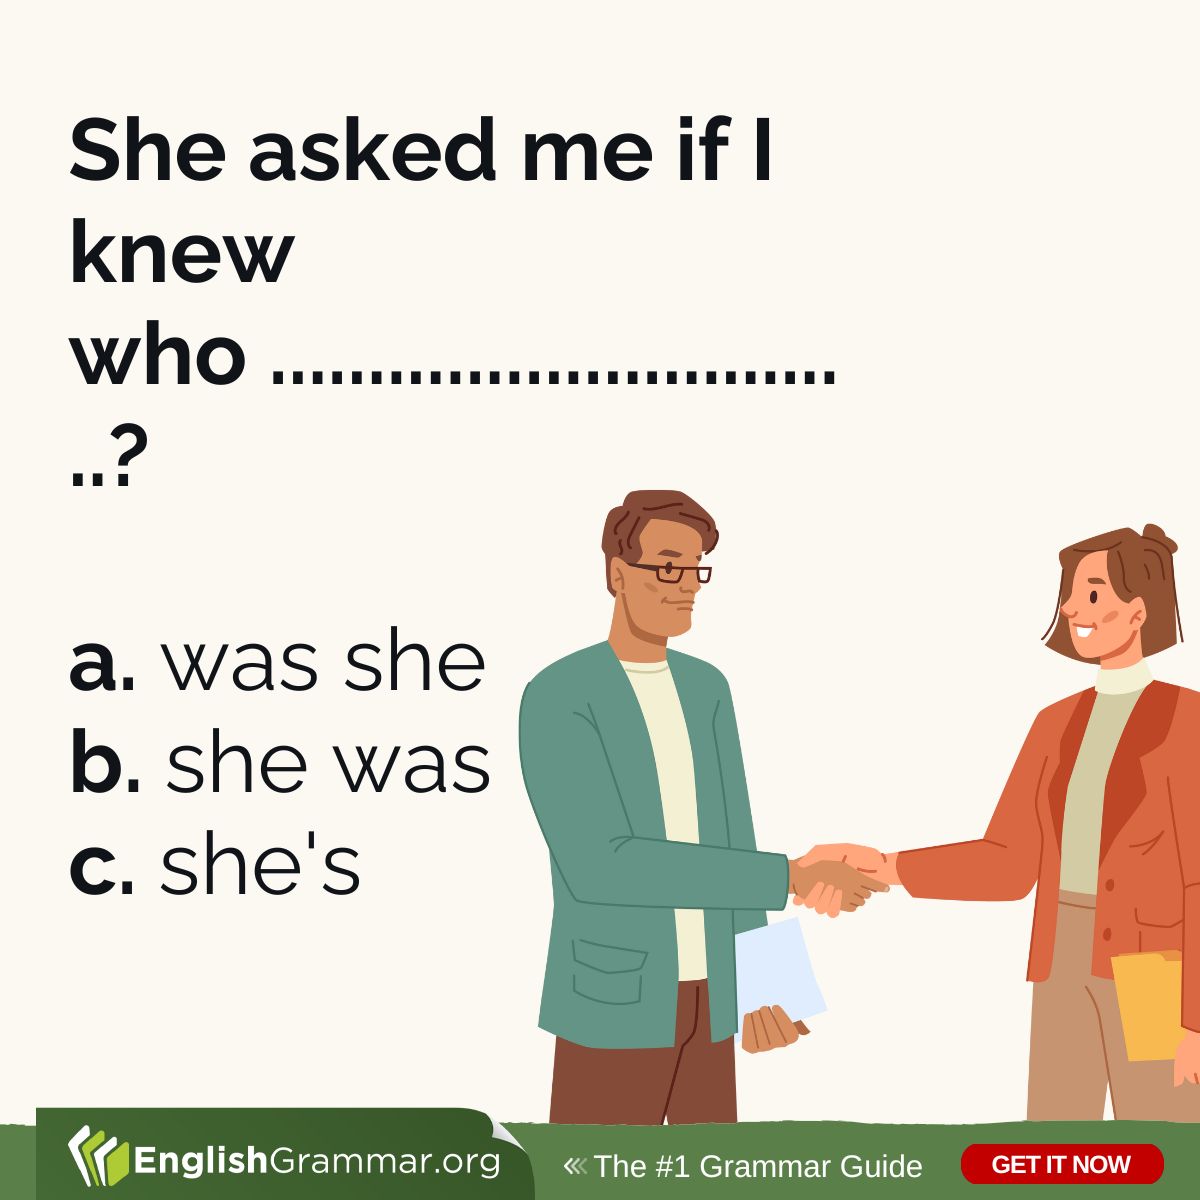 Anyone?

Find the right answer here: englishgrammar.org/embedded-quest…

#amwriting #writing #grammar